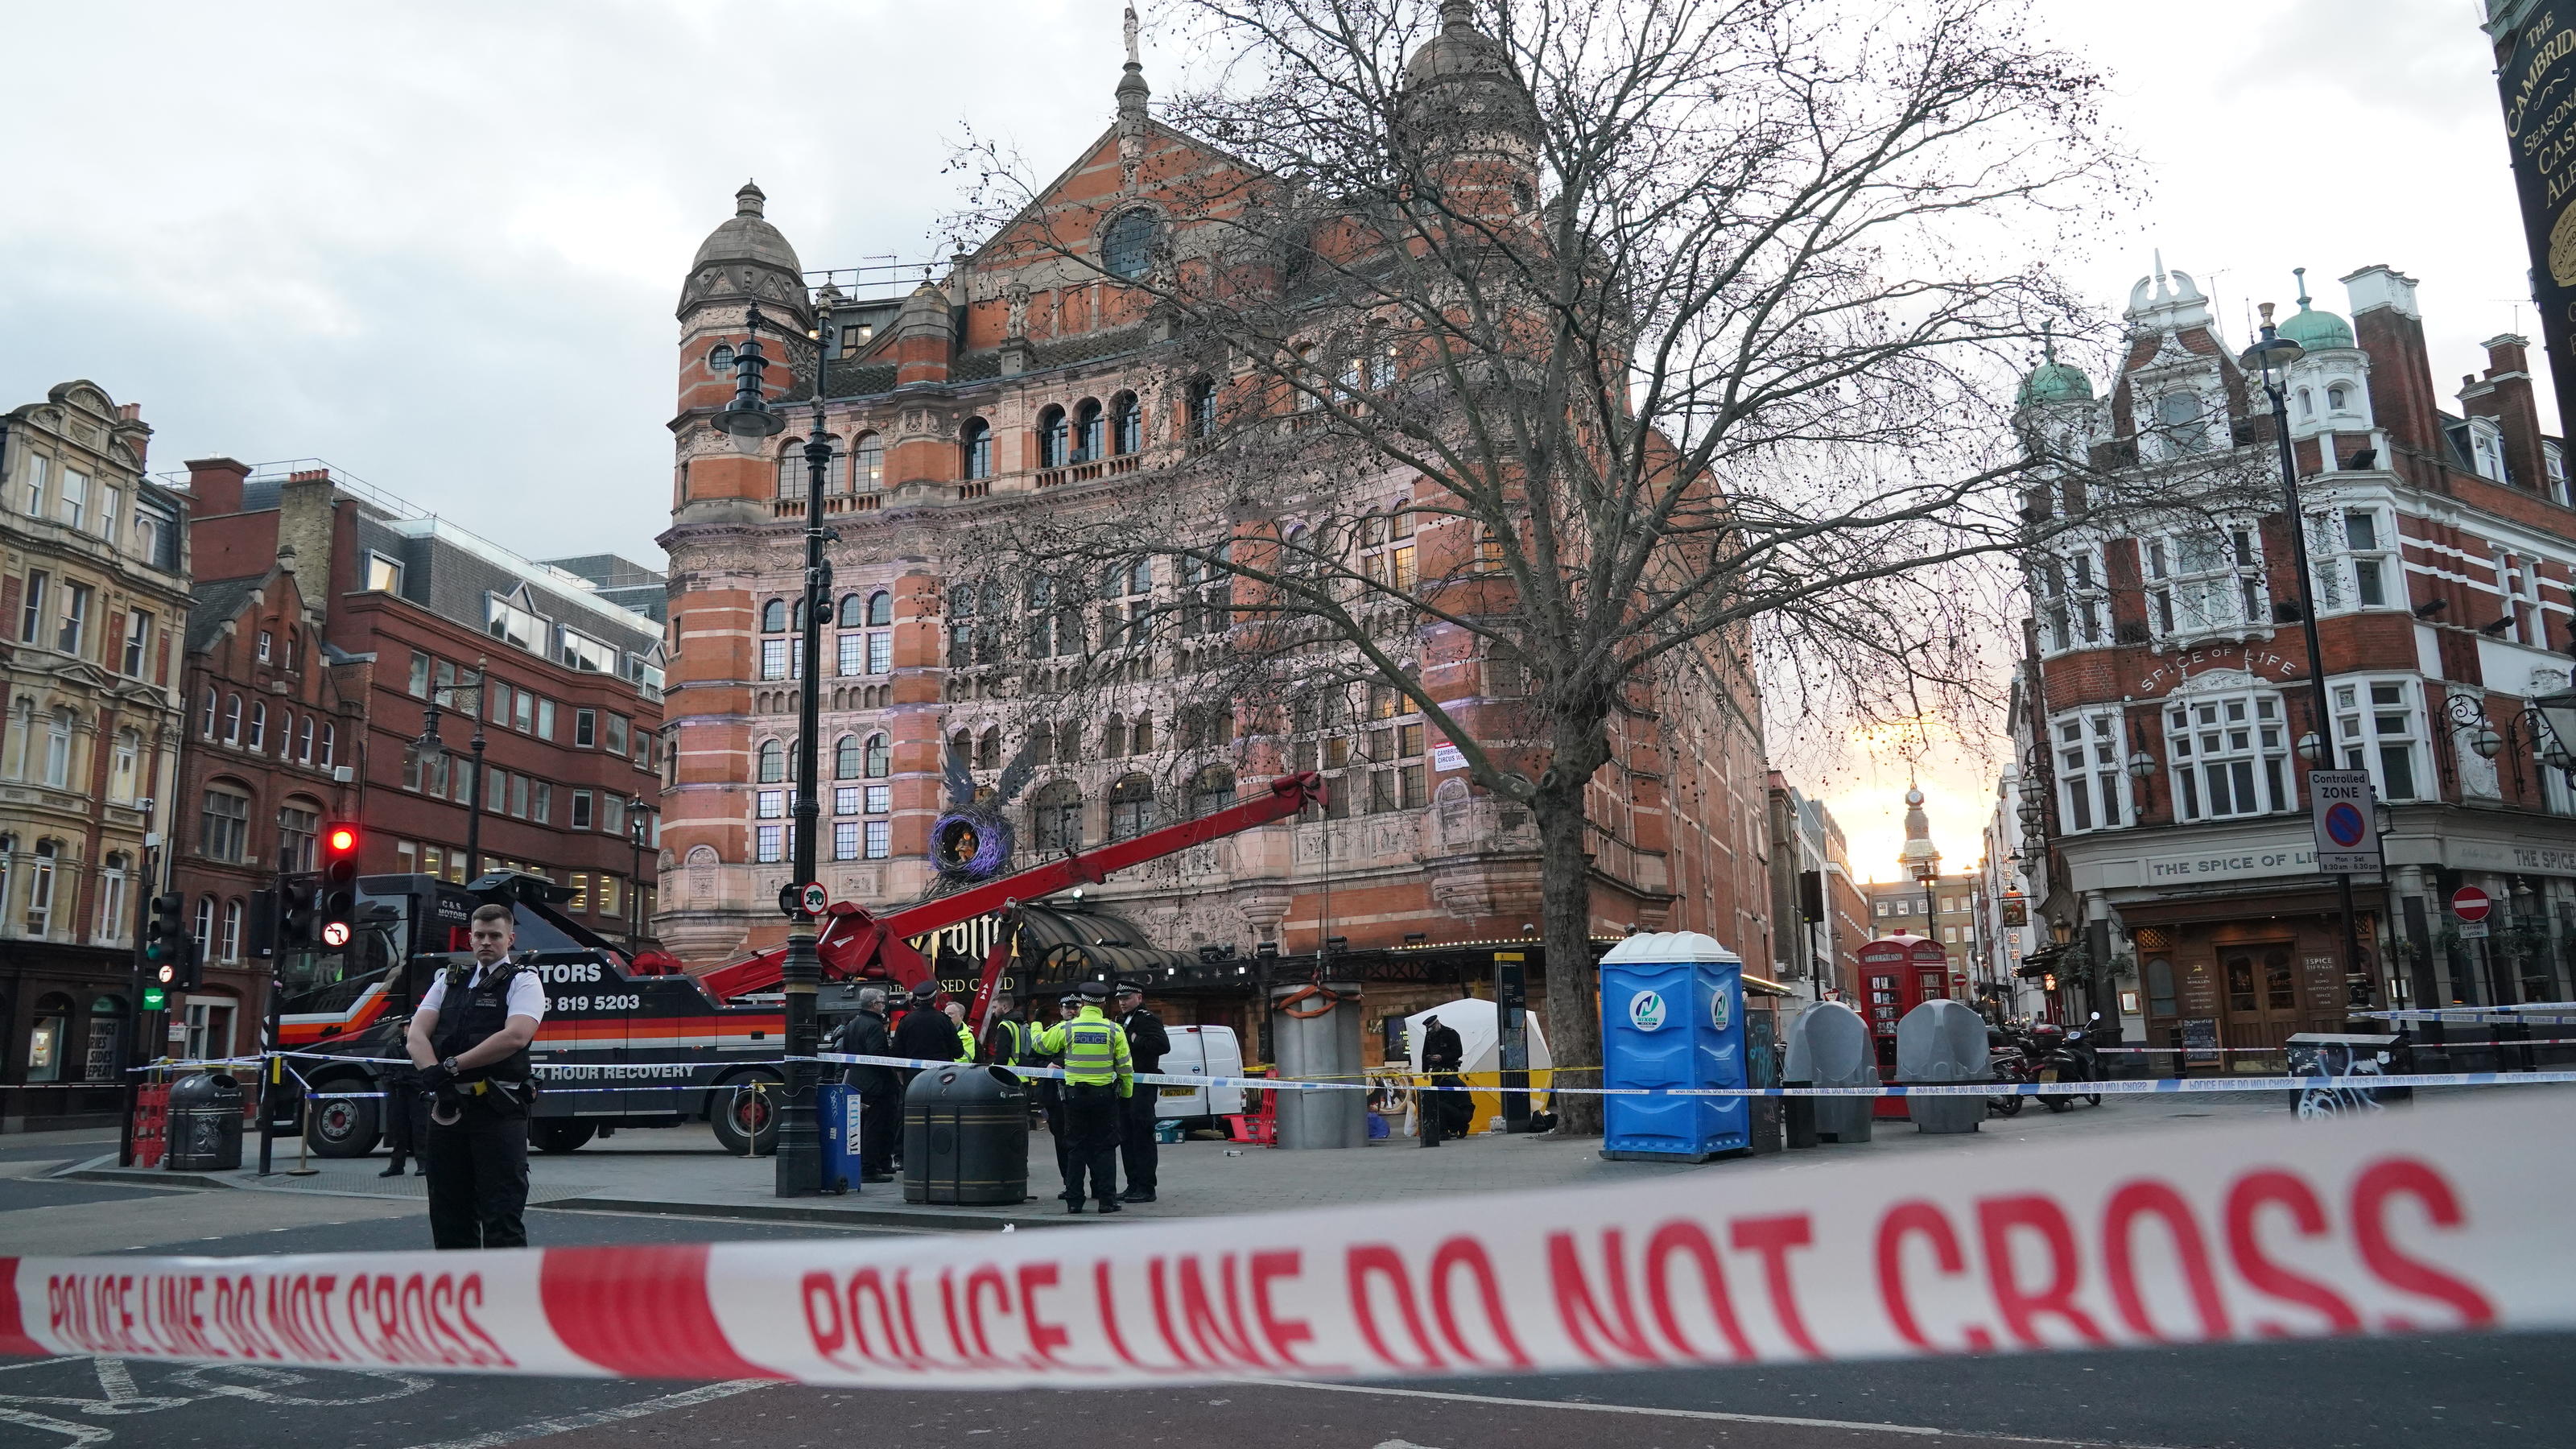 Man crushed by telescopic urinal. A police tent is erected at Cambridge Circus on the junction between Shaftesbury Avenue and Charing Cross Road in London, after a man has been crushed by a telescopic urinal. Fire crews said the man has been freed an